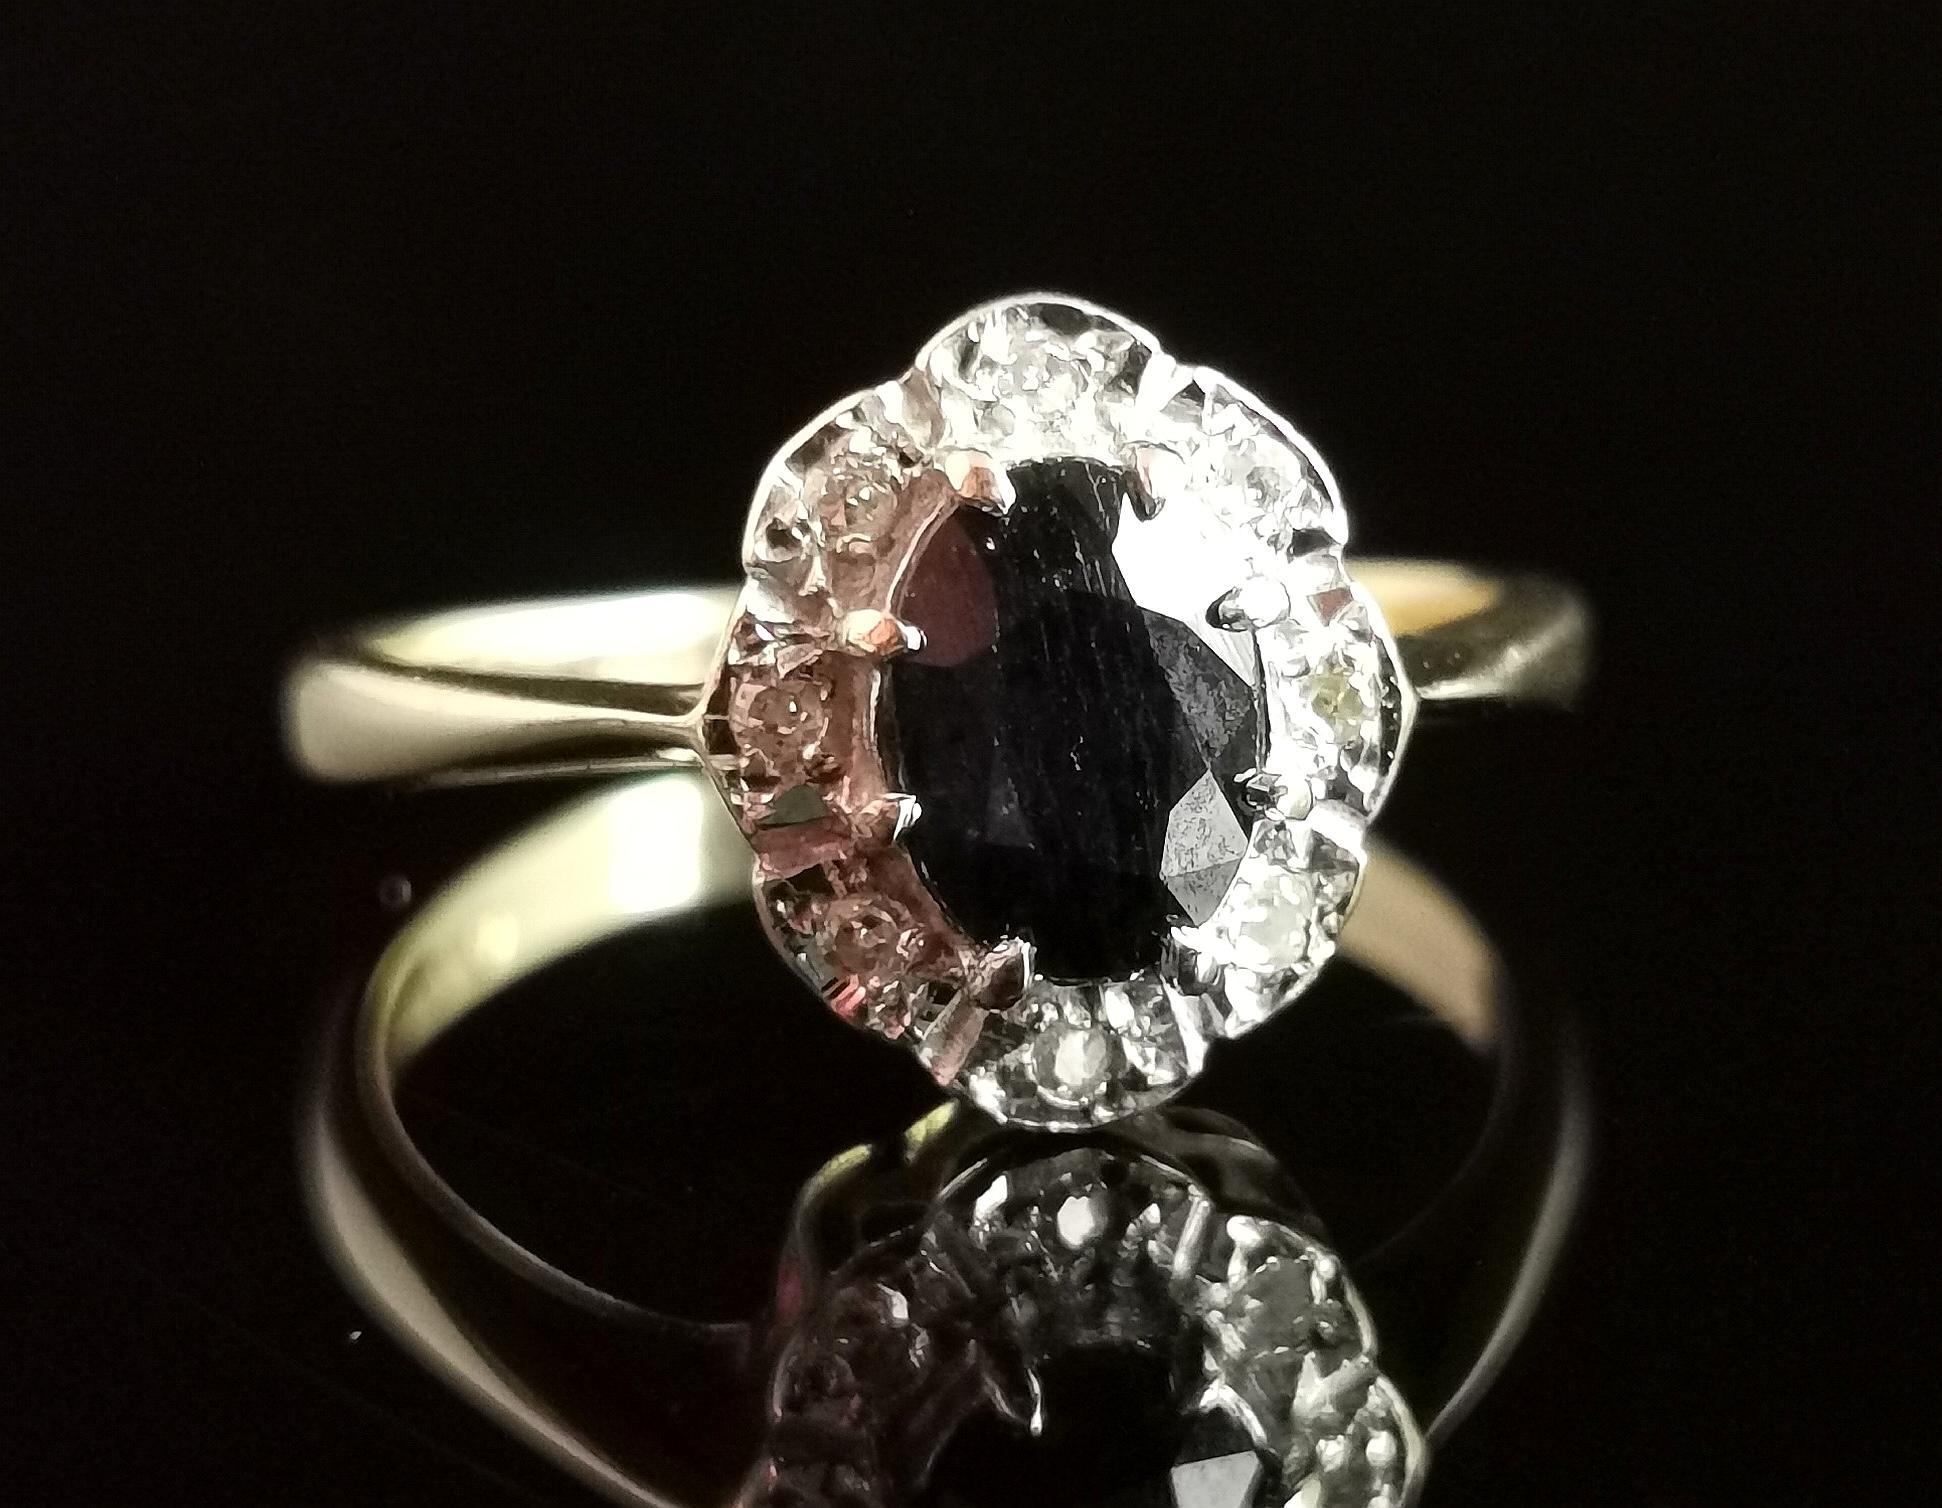 A beautiful vintage 1970s Sapphire and diamond cluster ring.

A decadent beauty, it has been made to stand out and the dark blue, oval cut sapphire takes centre stage.

The sapphire is surrounded by a halo of crisp white diamond chips giving a